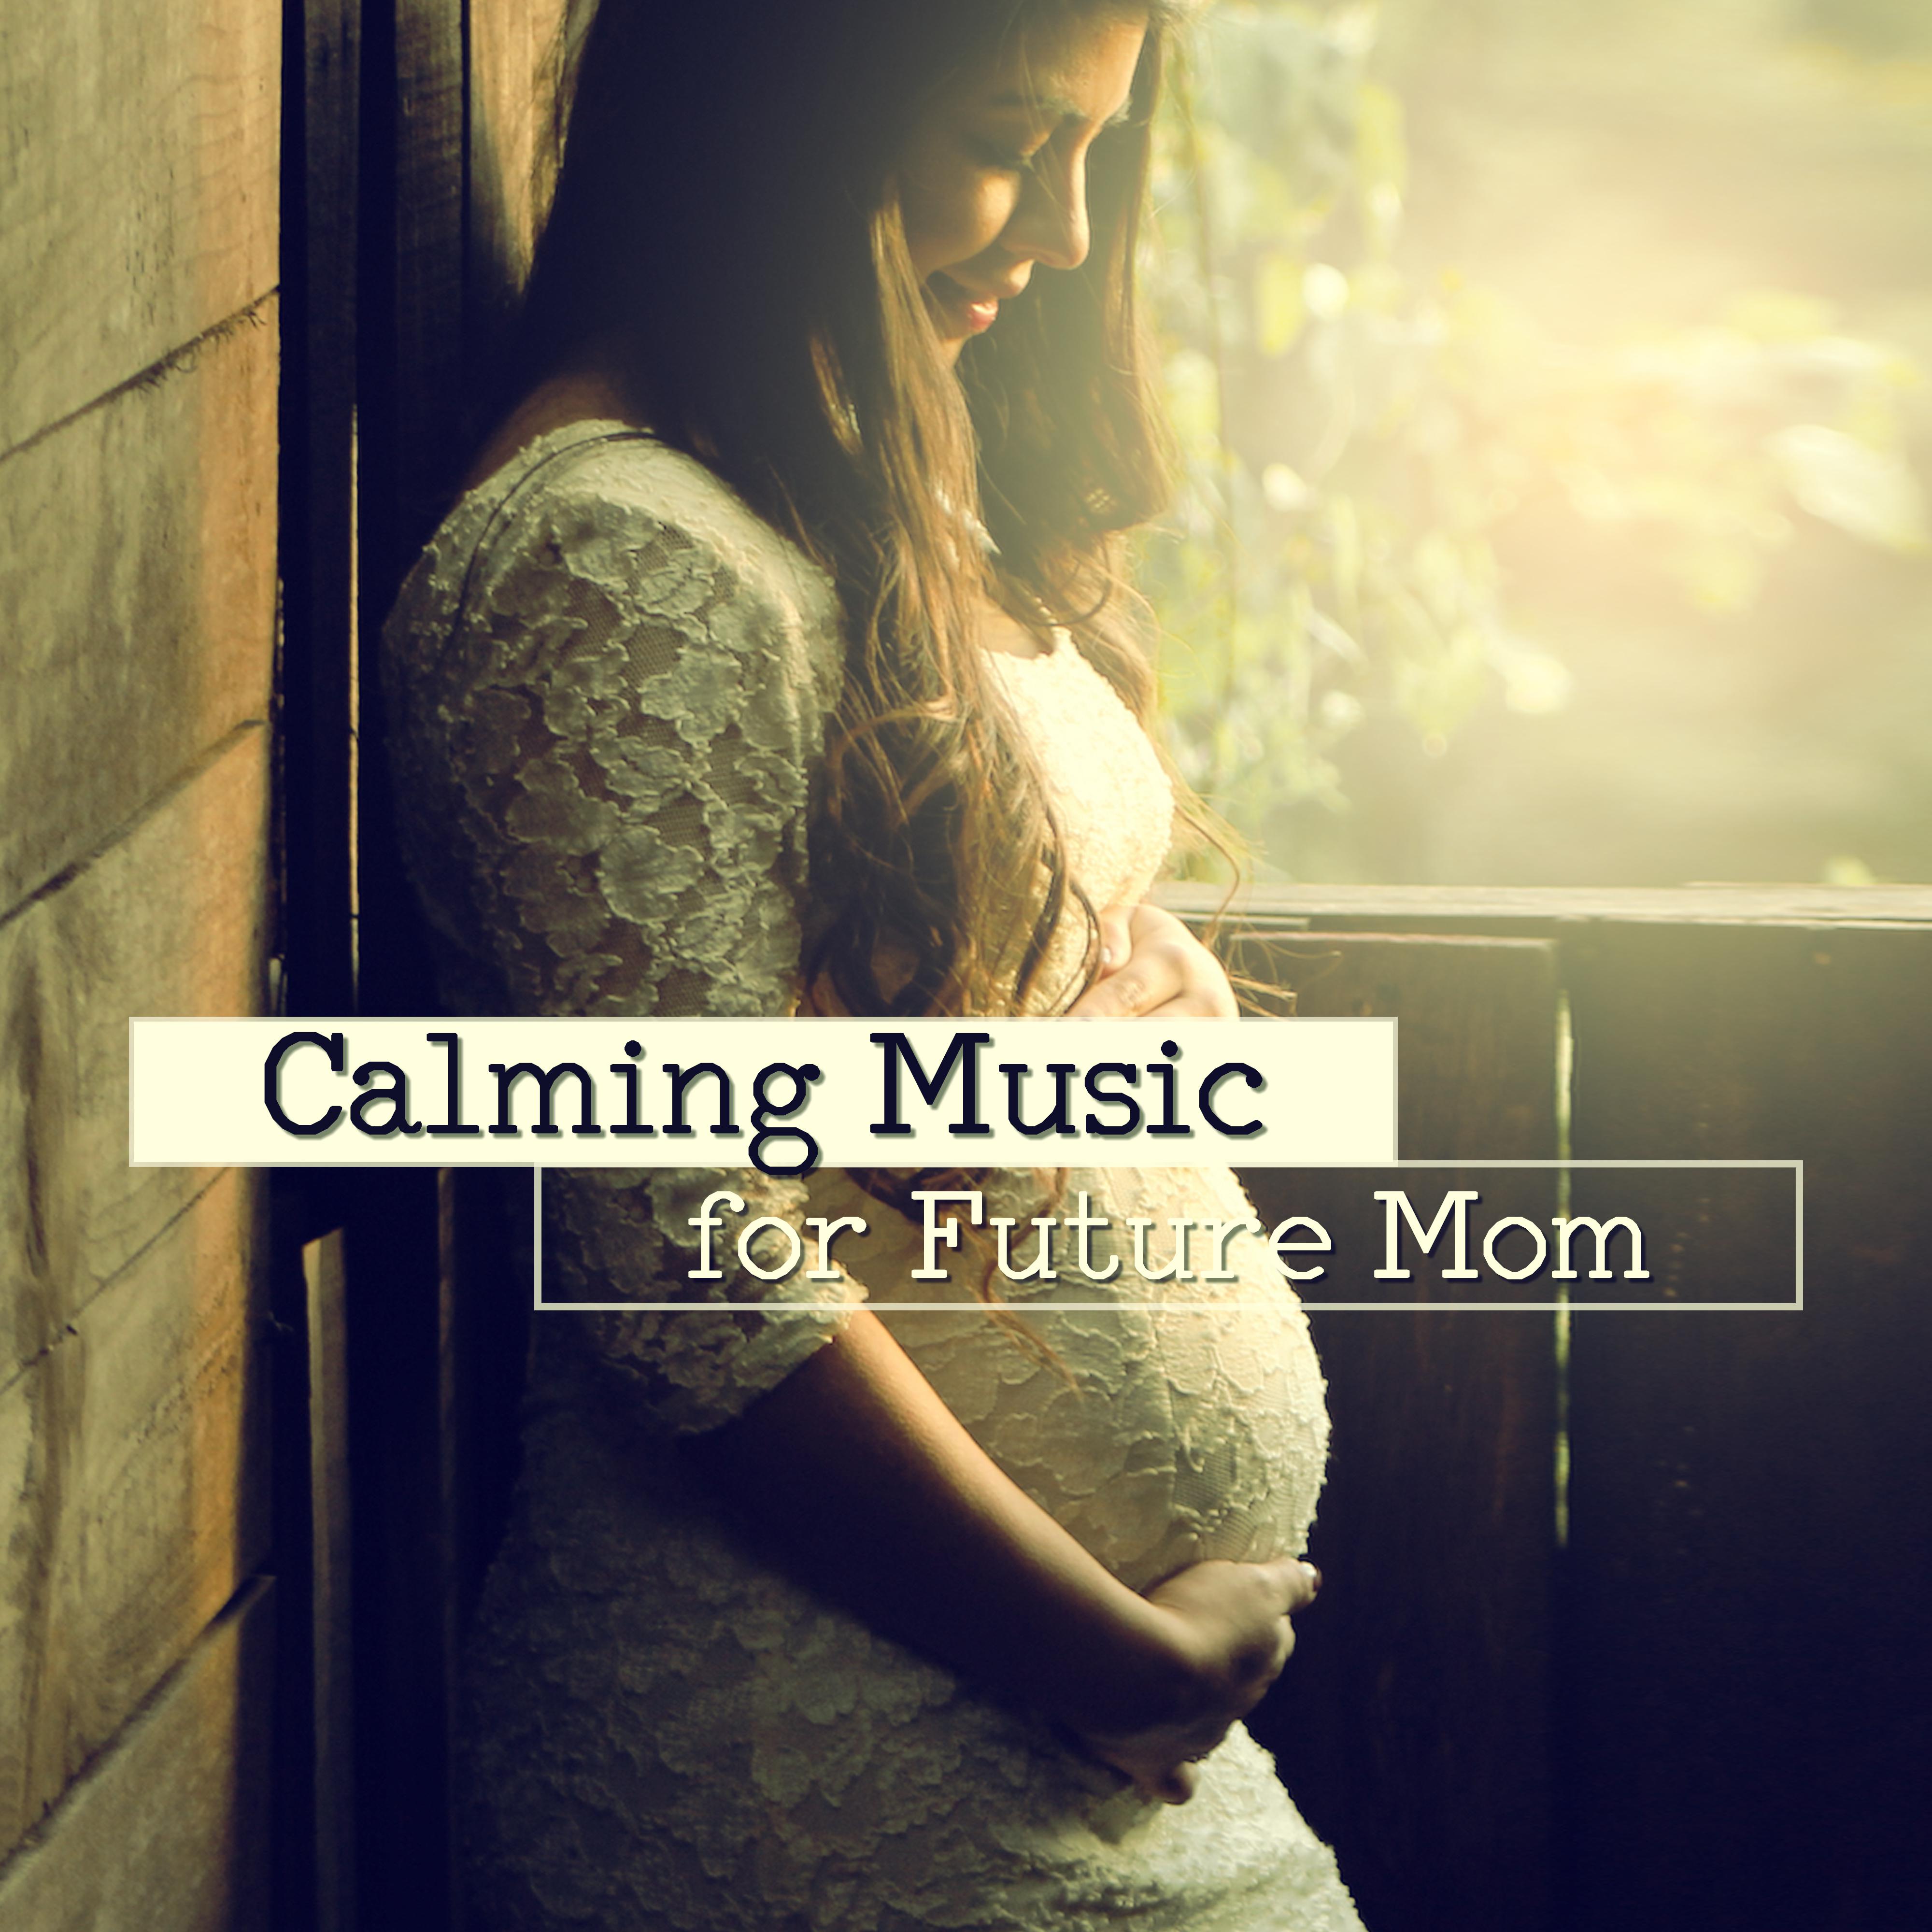 Calming Music for Future Mom  Pregnancy Music, Soothing Sounds, Prenatal Yoga, Zen Music, Stress Relief, Deep Sleep, Healing Music for Pregnant Woman